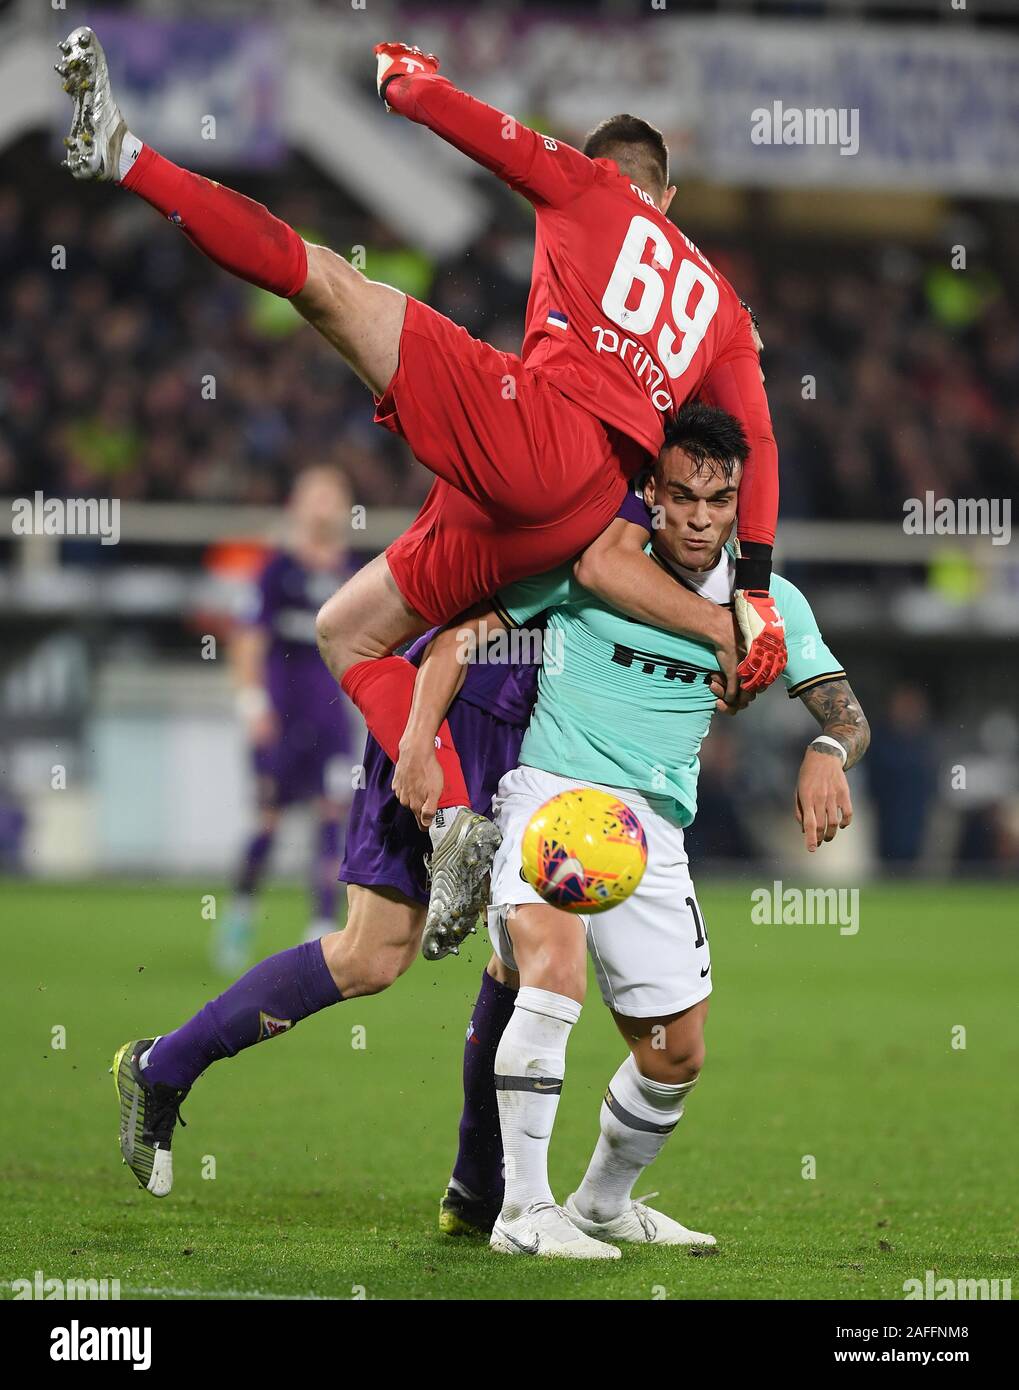 Florence, Italy. 15th Dec, 2019. FC Inter's Lautaro Martinez (R) vies with Fiorentina's Bartlomiej Dragowski during an Italian Serie A soccer match in Florence, Italy, Dec. 15, 2019. Credit: Alberto Lingria/Xinhua/Alamy Live News Stock Photo